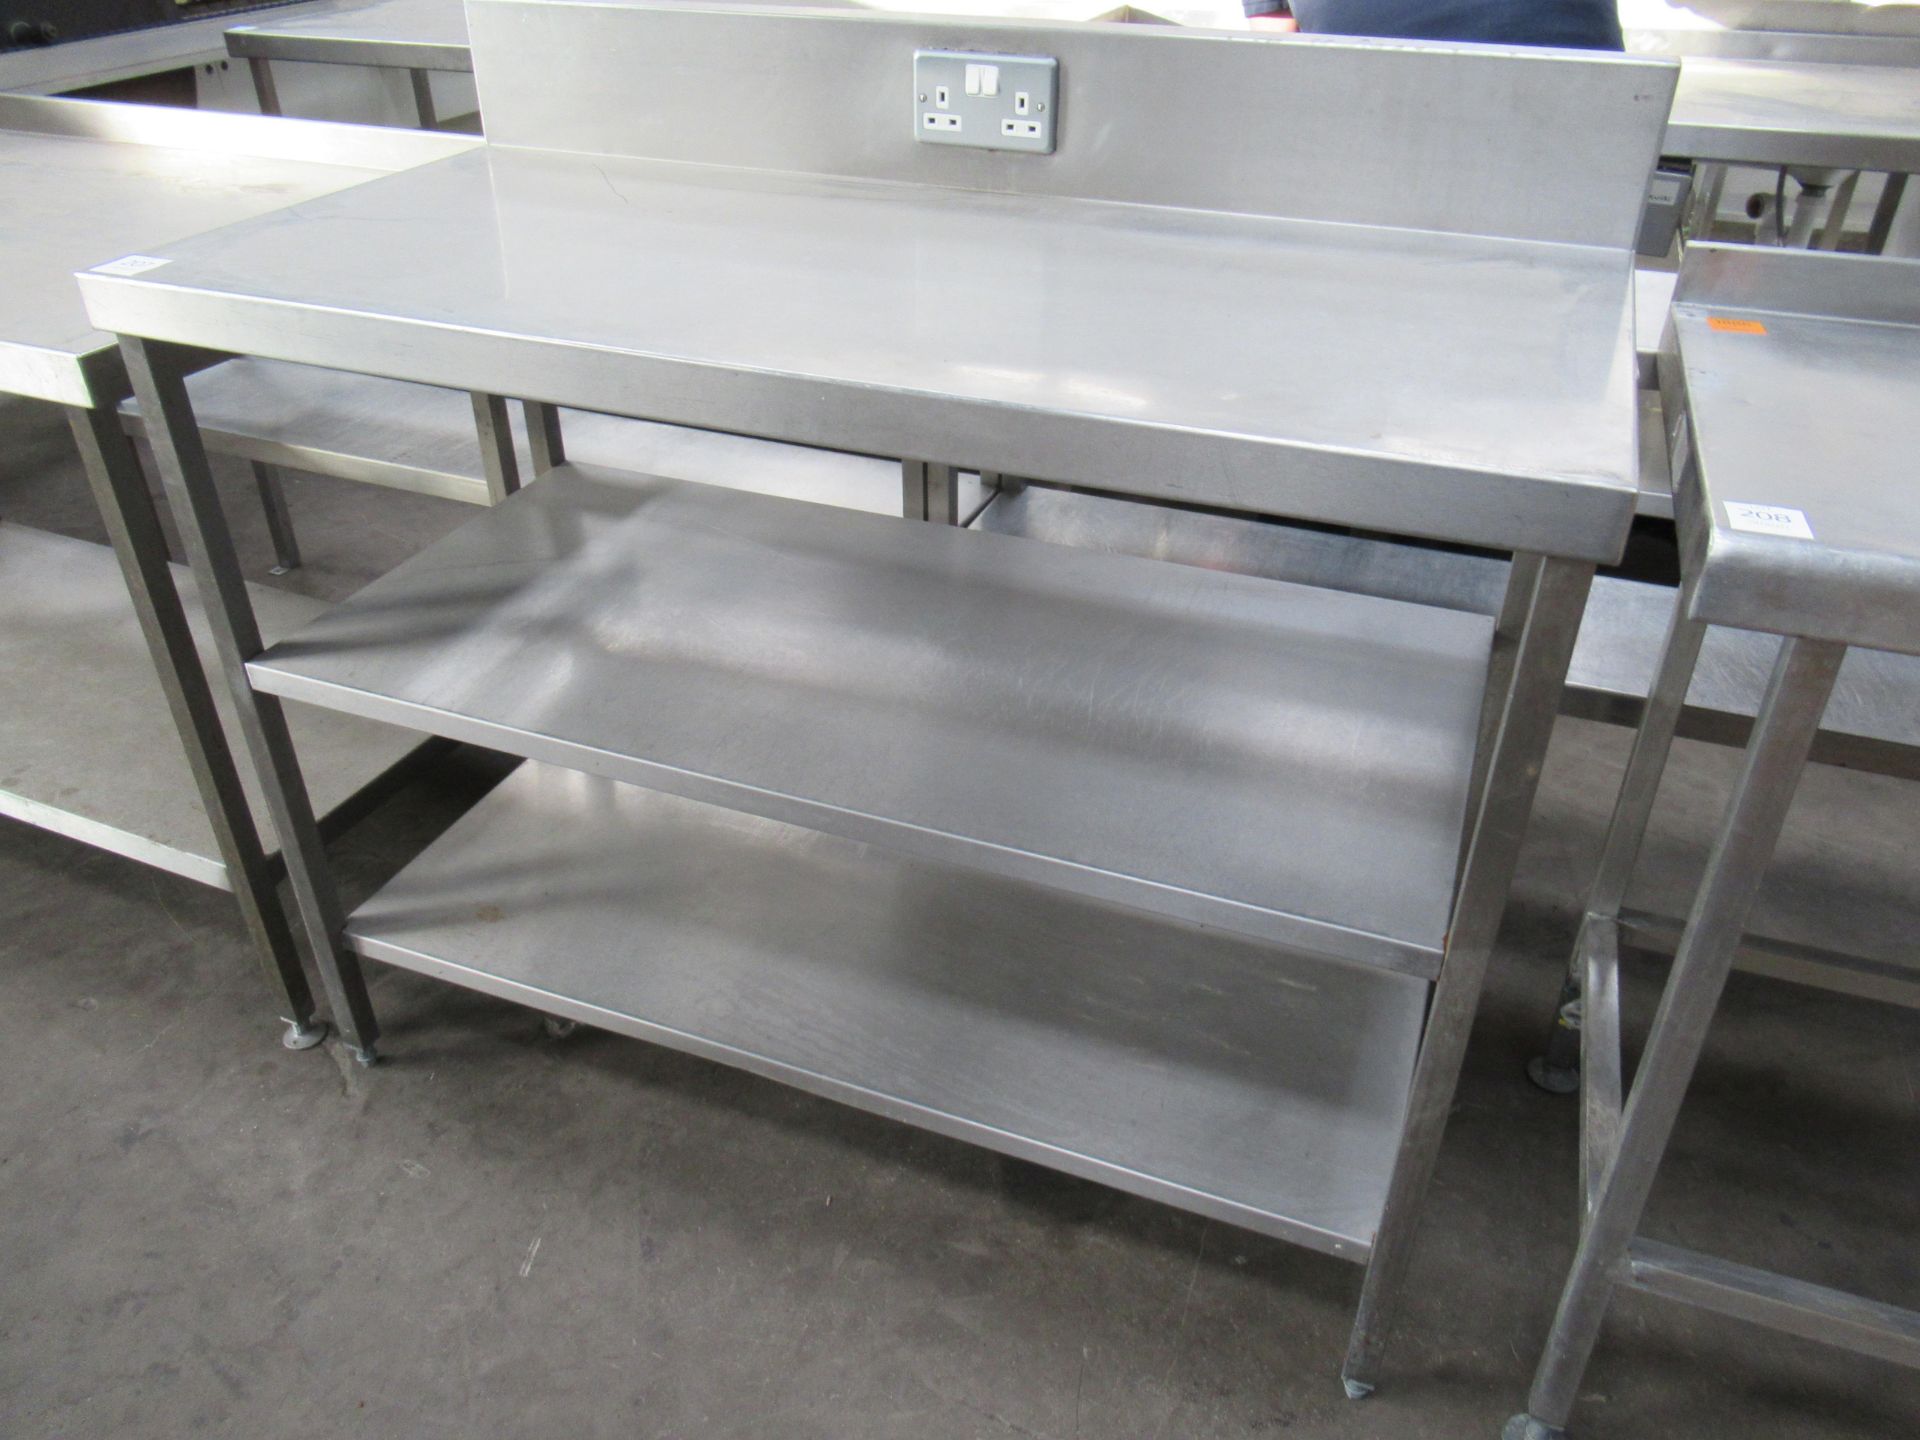 Stainless steel preperation table with two under shelves and double electrical socket 1200 x 700mm - Image 2 of 2